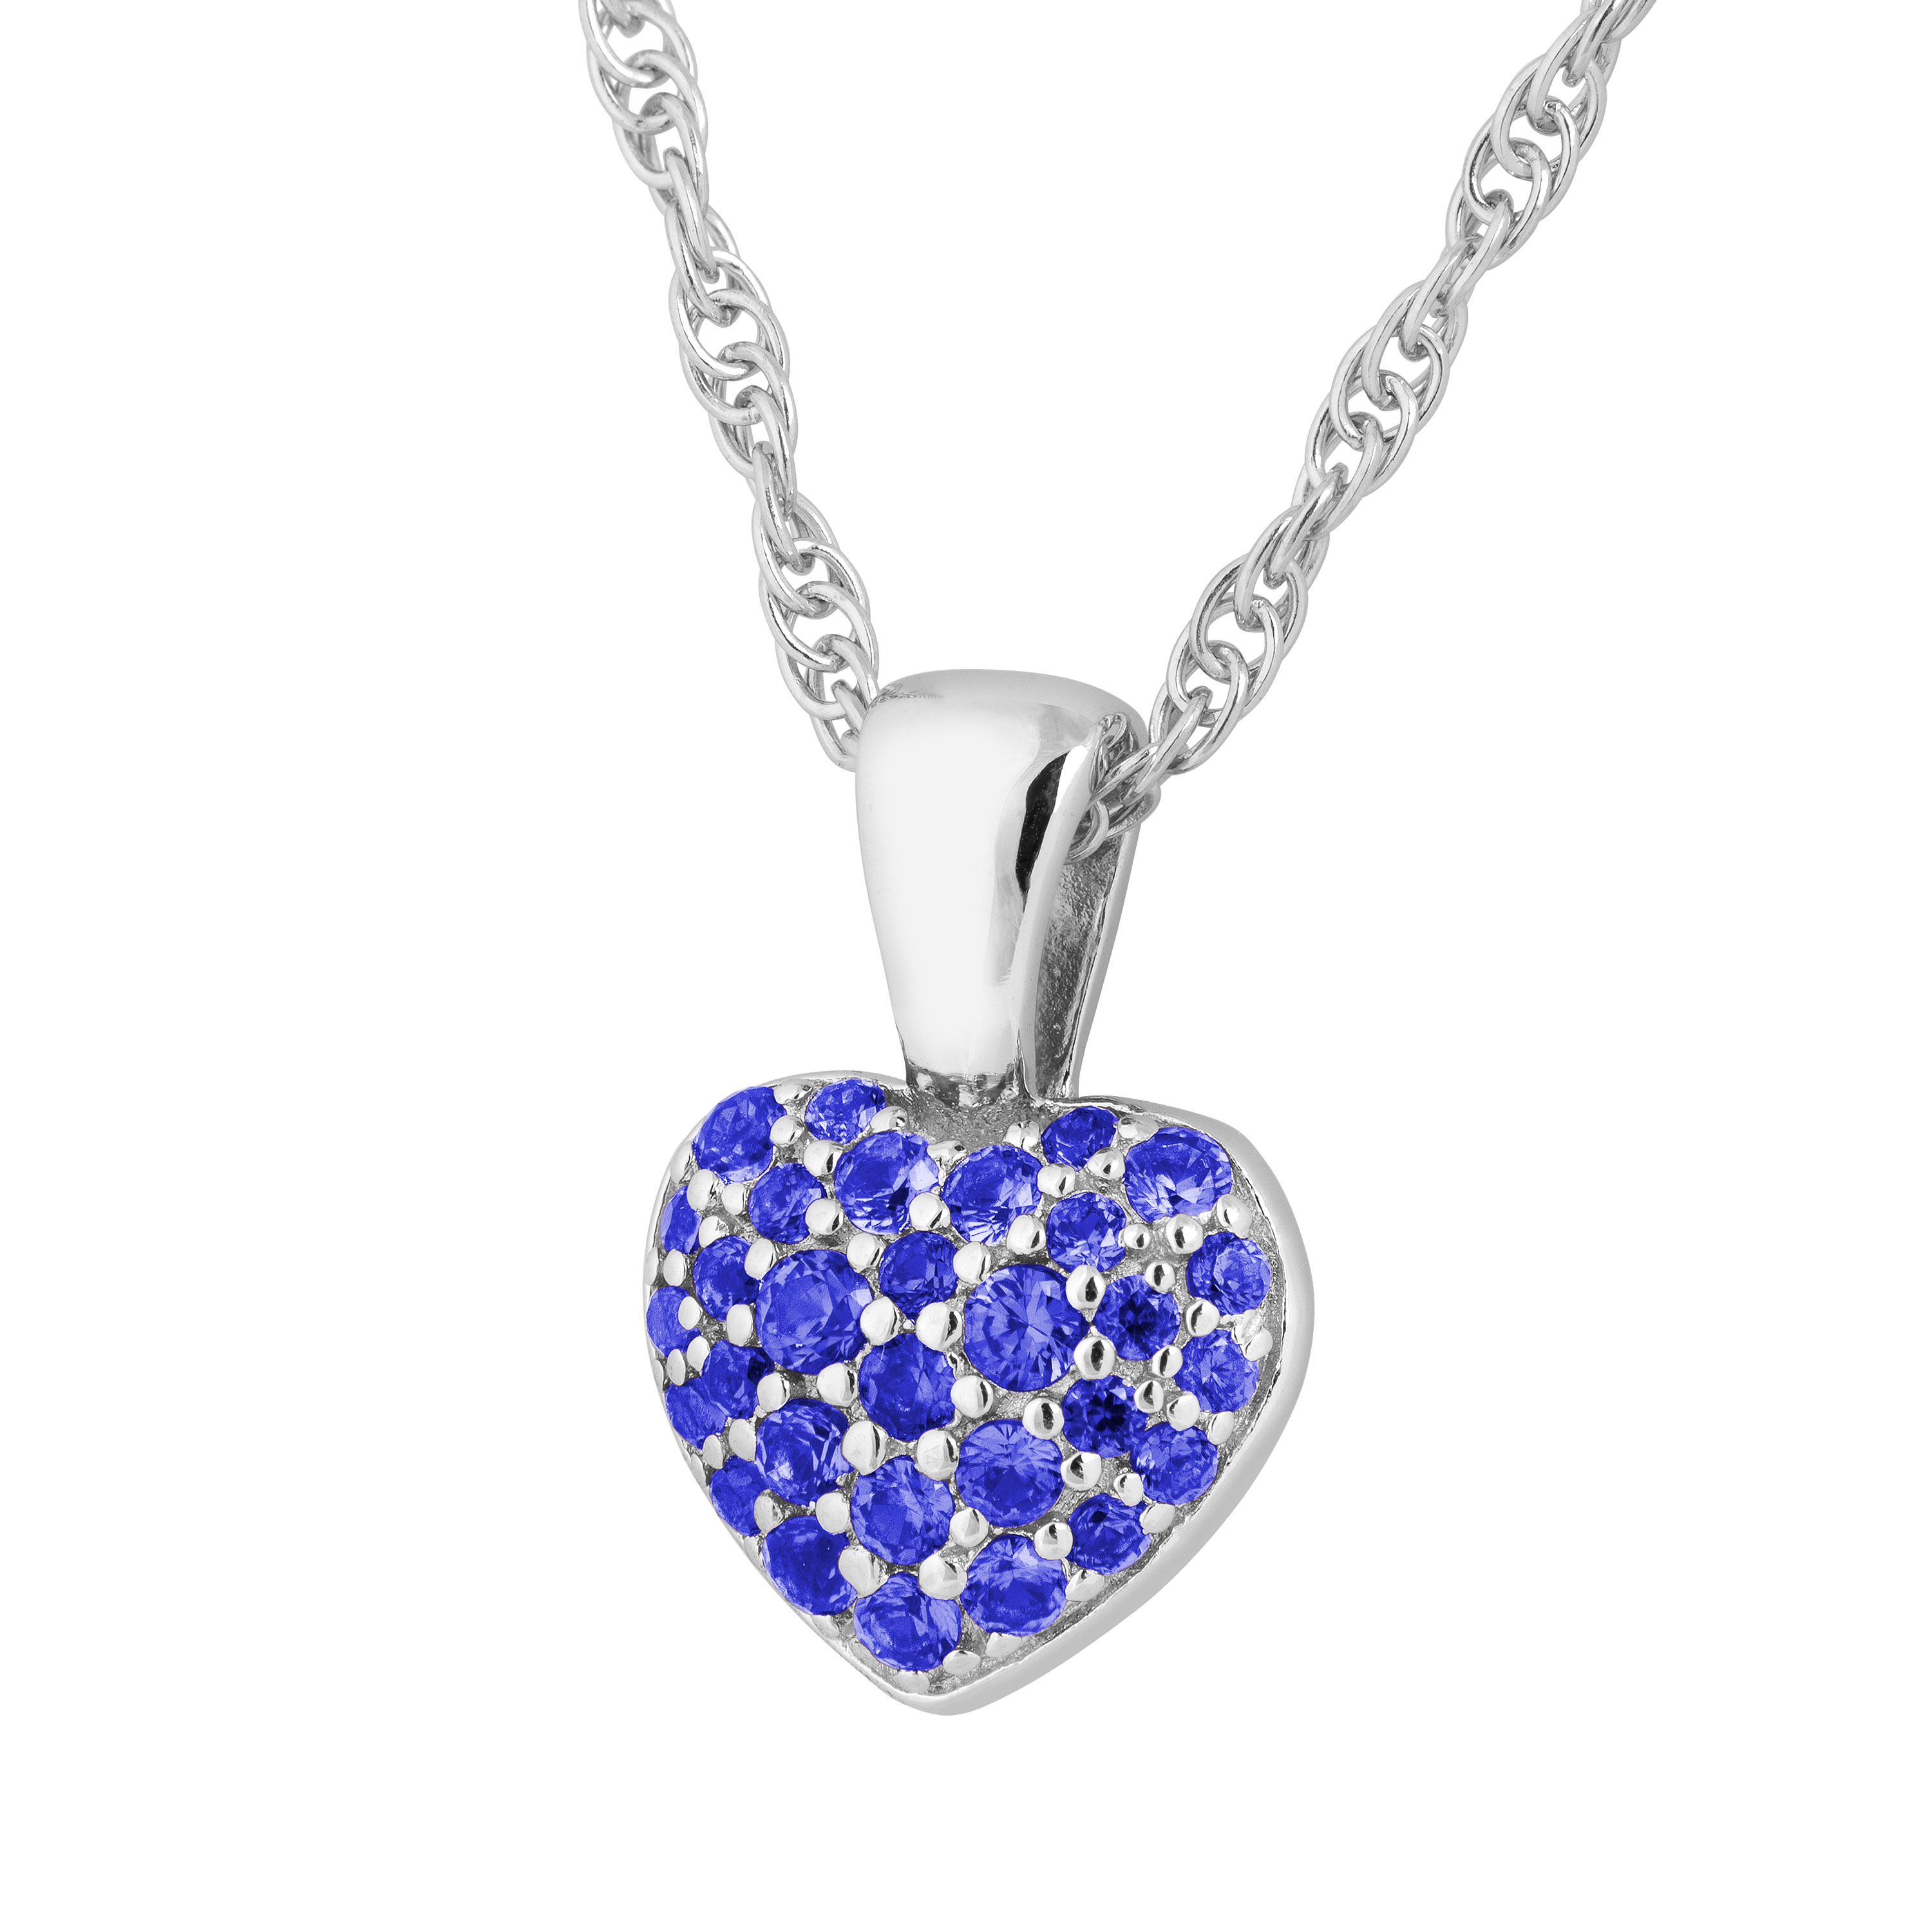 CZ Pendant Necklace, Rhodium Plated Sterling Silver